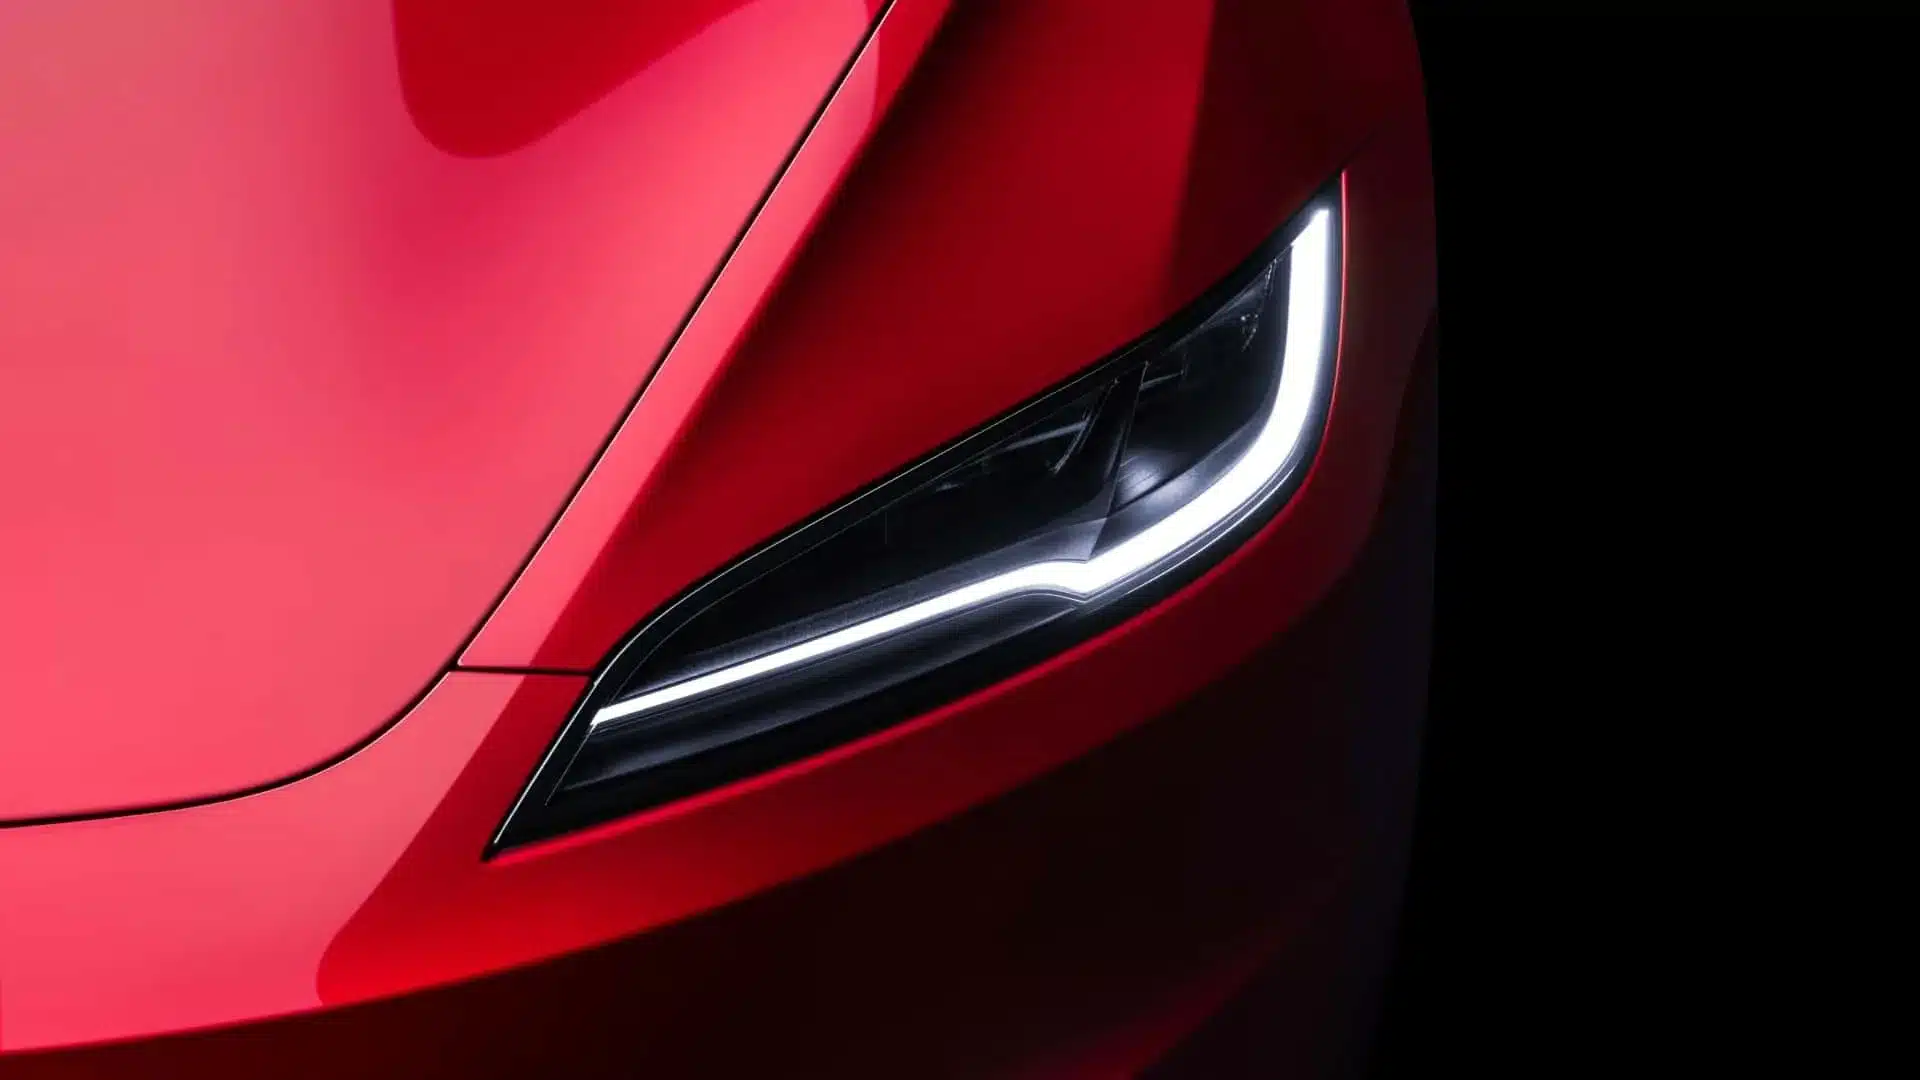 Tesla reveals new Model 3 with first major refresh in years